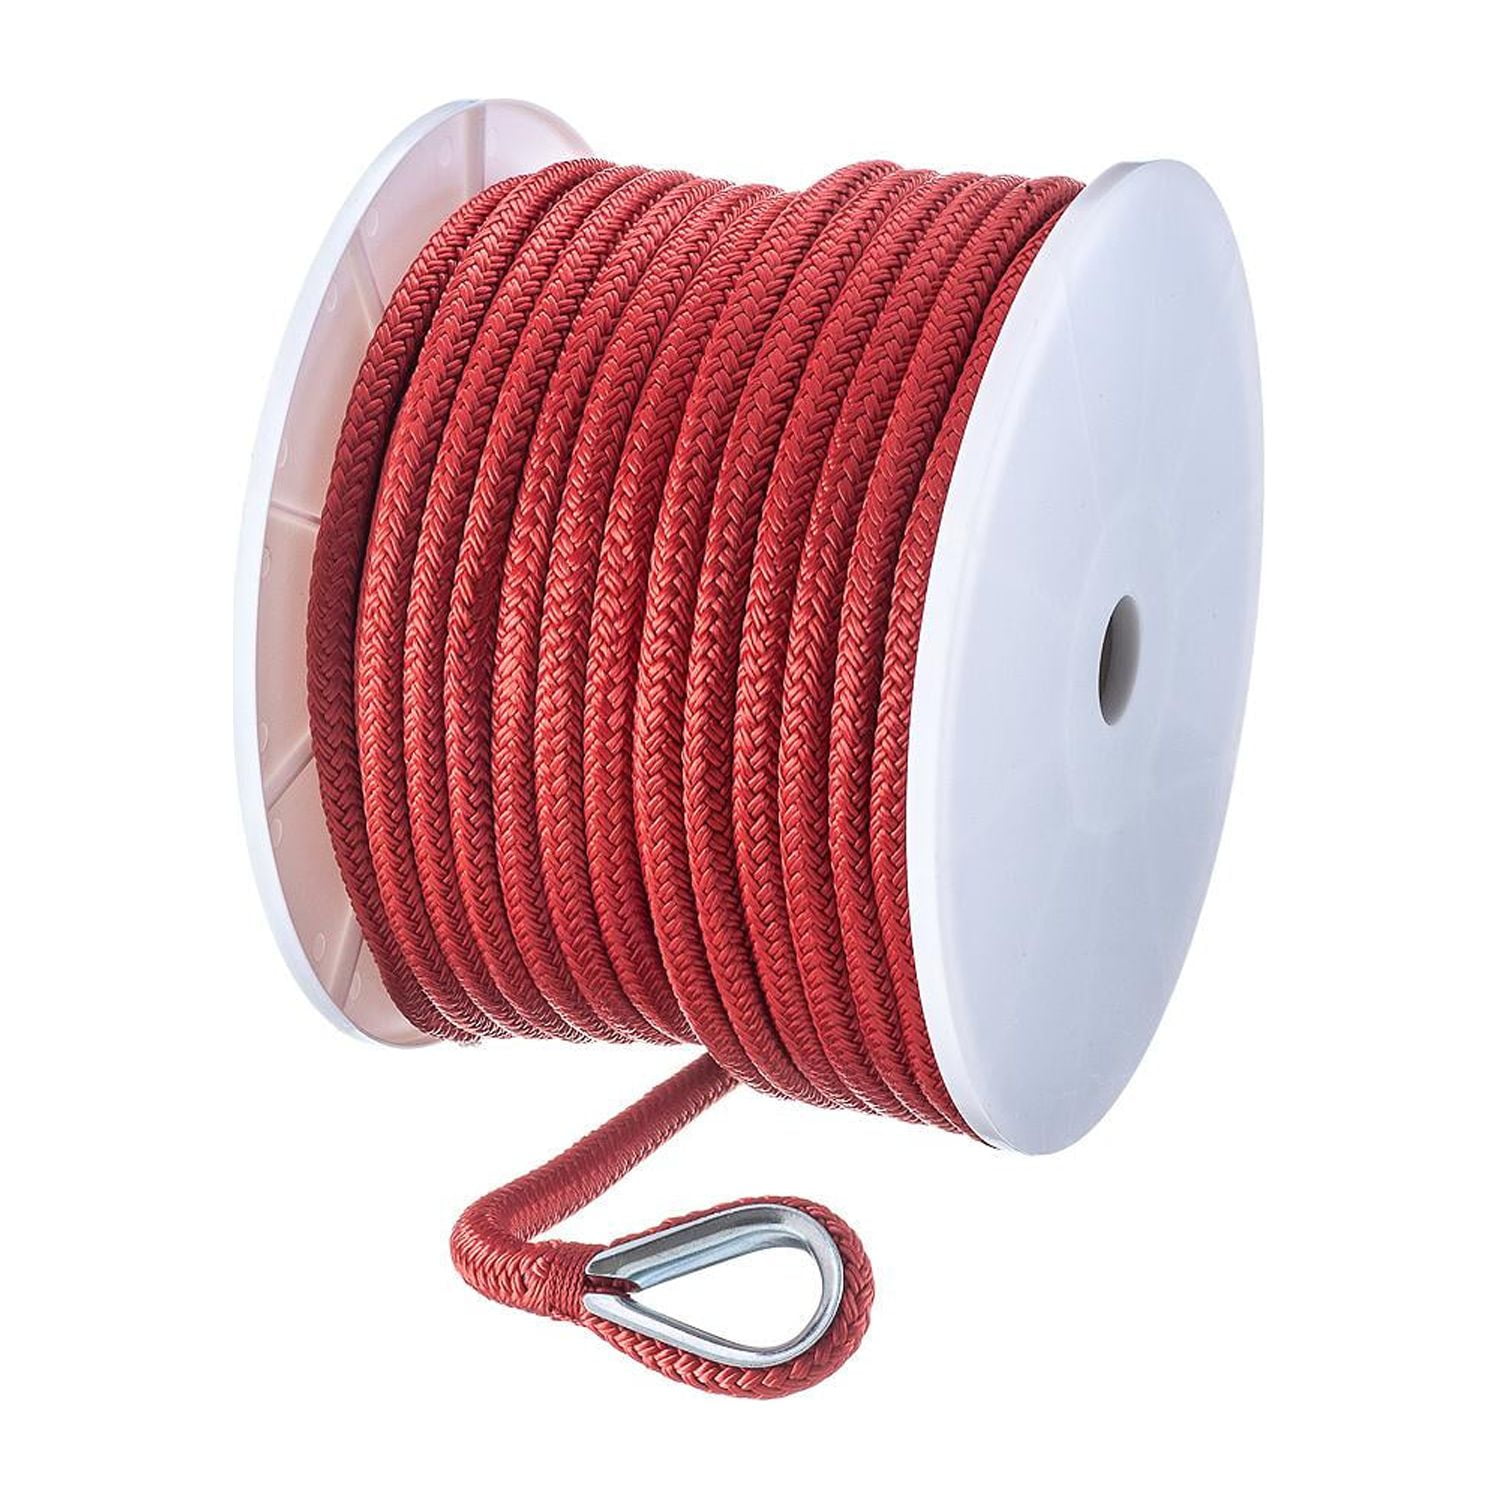 Seachoice Boat Anchor Rope, Double-Braid, Nylon, Achor Line, 1/2 In. X 150  Ft., Red